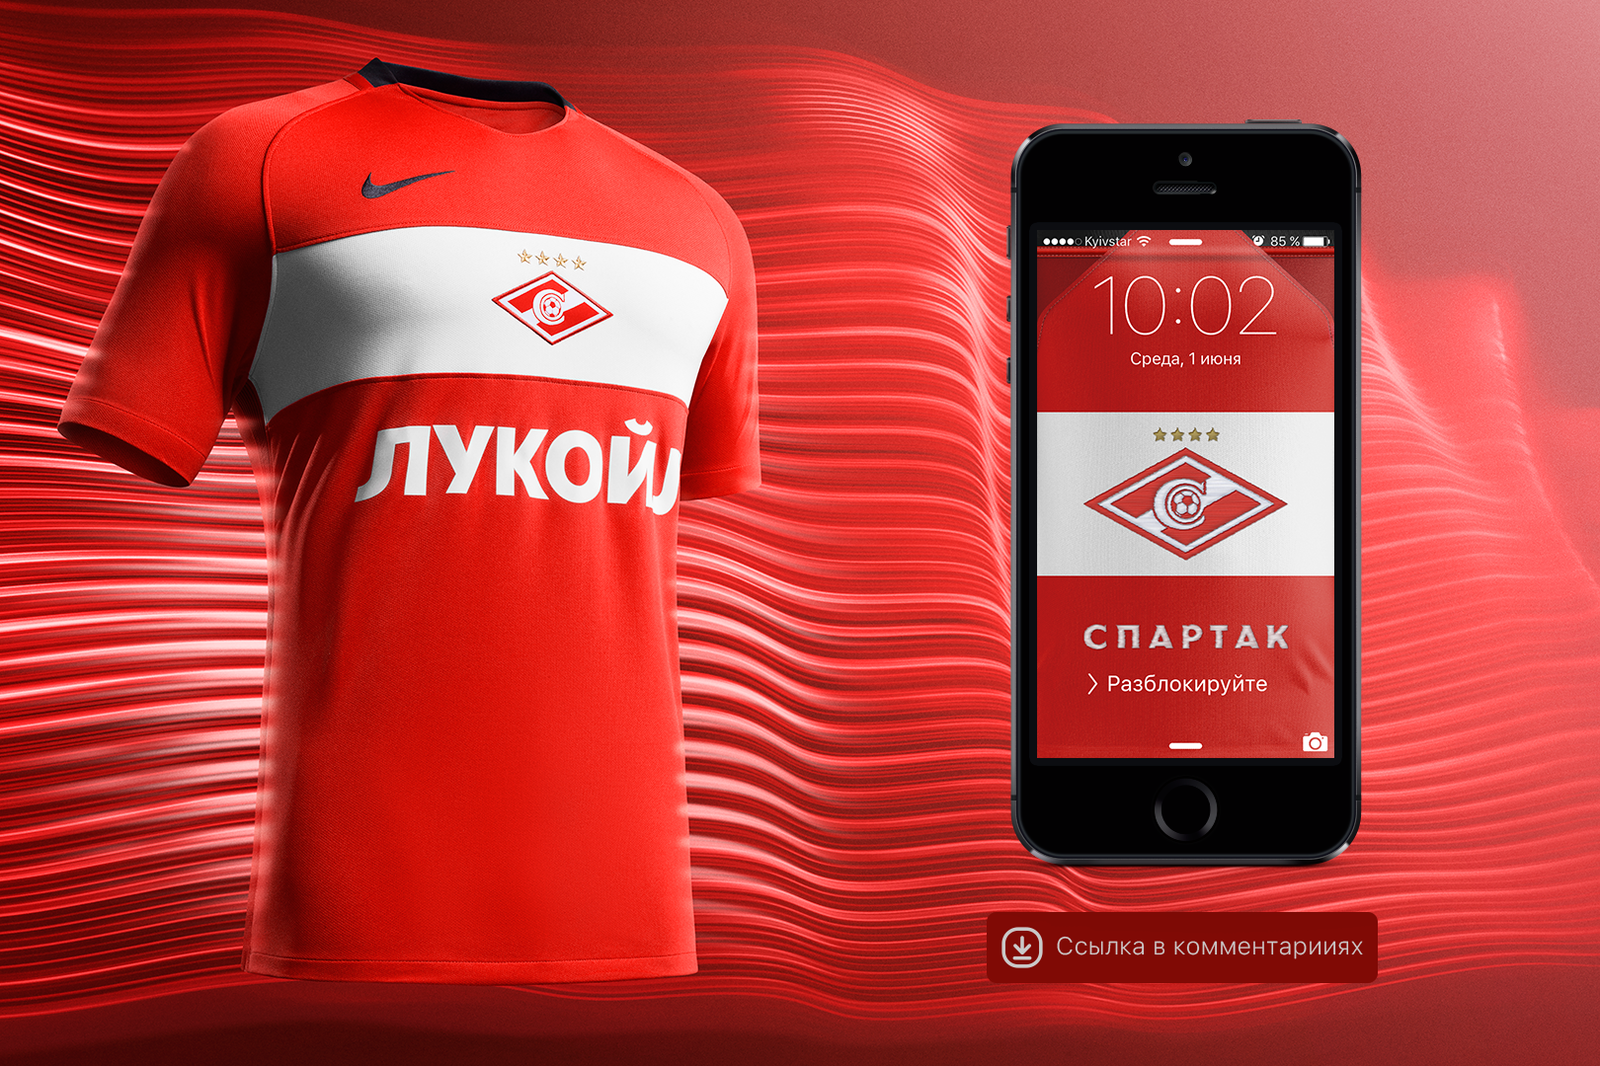 Wallpaper for iPhone - My, Spartak Moscow, iPhone, Wall, Spartacus, Wallpaper, Football, My, Russian Premier League